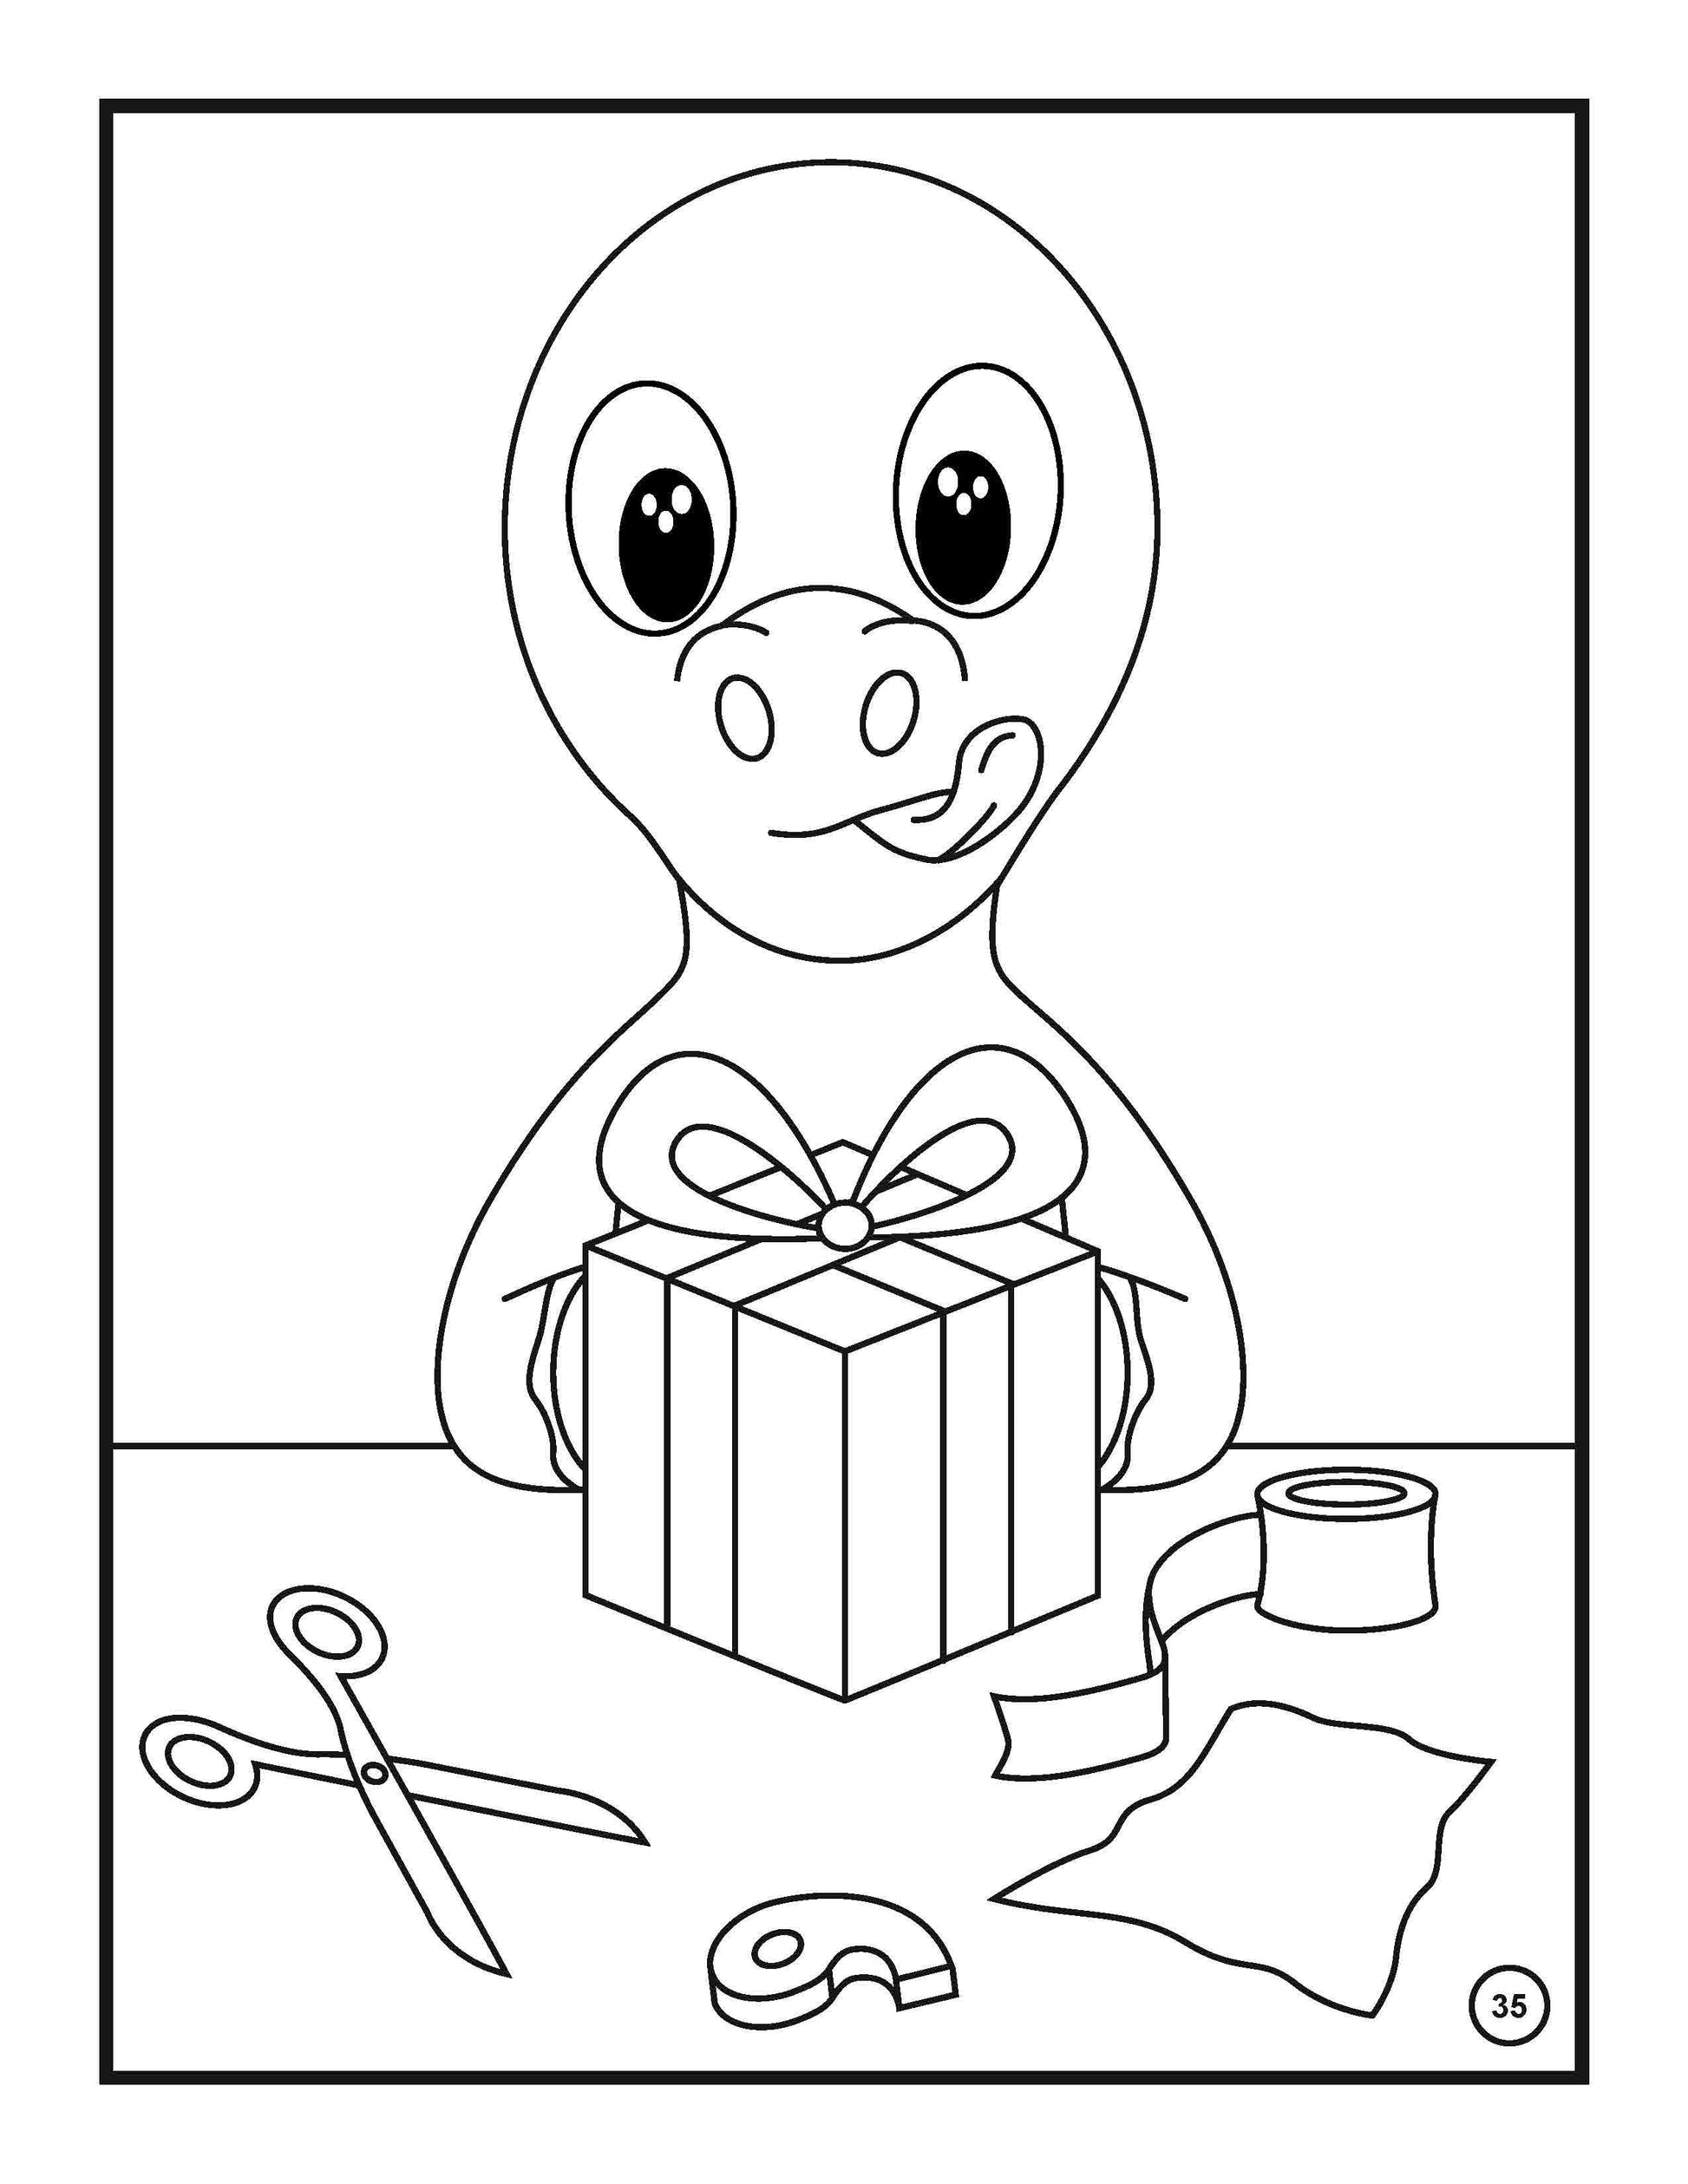 Coloring page depicting a cheerful cartoon dinosaur holding a wrapped gift box with a ribbon on top. In front of the dinosaur are scattered gift-wrapping accessories: a pair of scissors, a roll of tape, a tape dispenser, and a piece of wrapping paper. The dinosaur has large, friendly eyes, and a smile, creating a festive and engaging scene for coloring